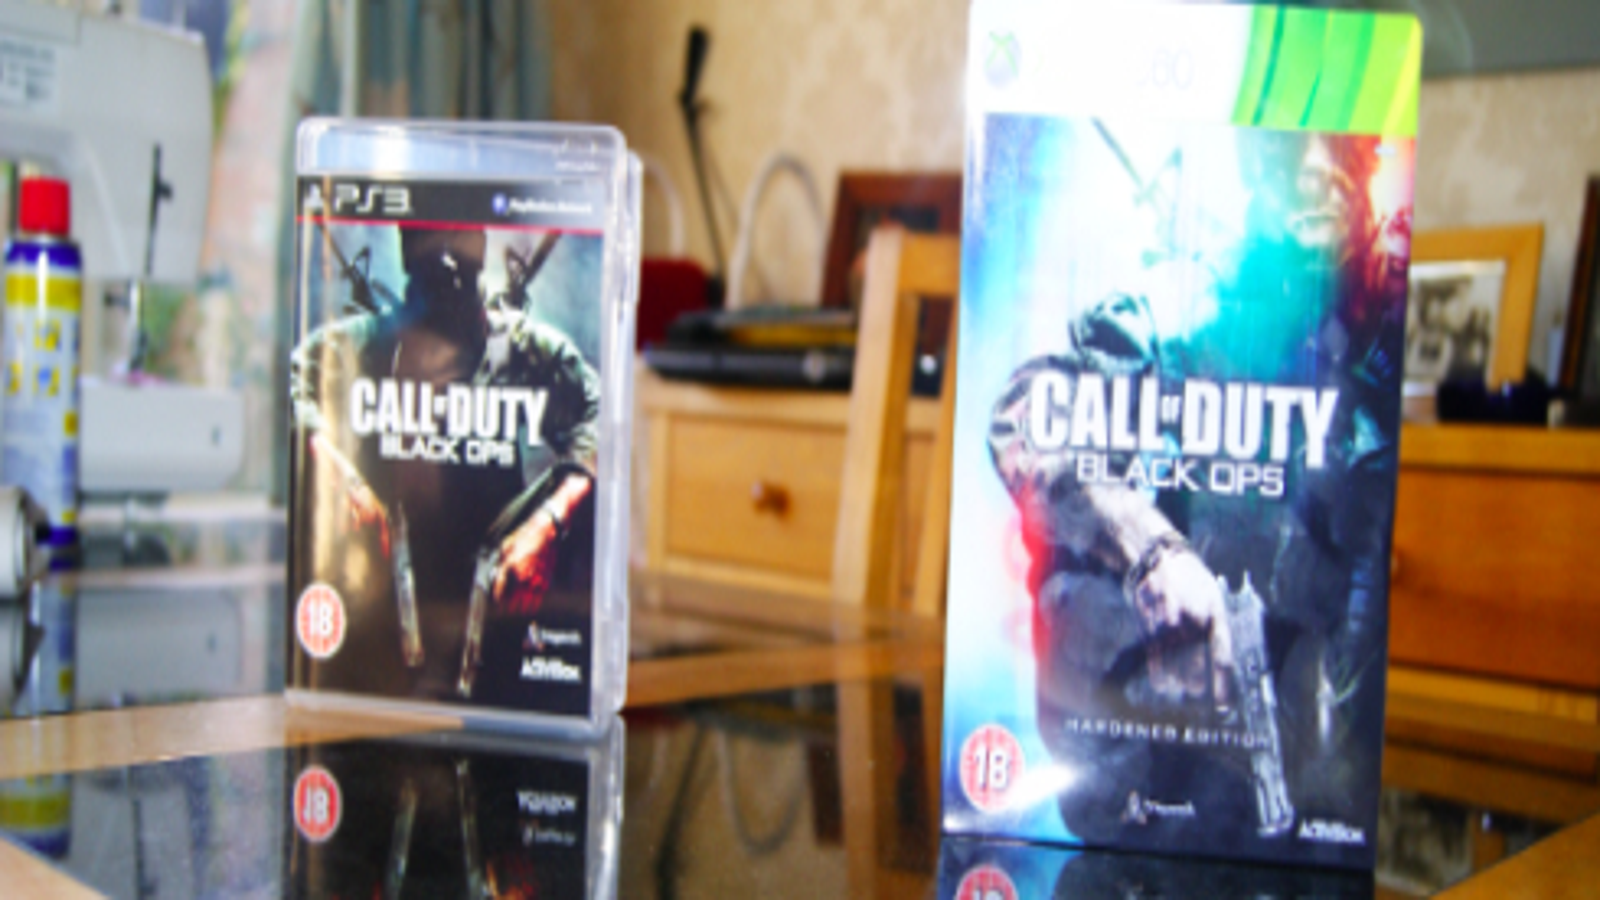 Call of Duty: Advanced Warfare - Xbox 360 \ PS3 - UNBOXING 